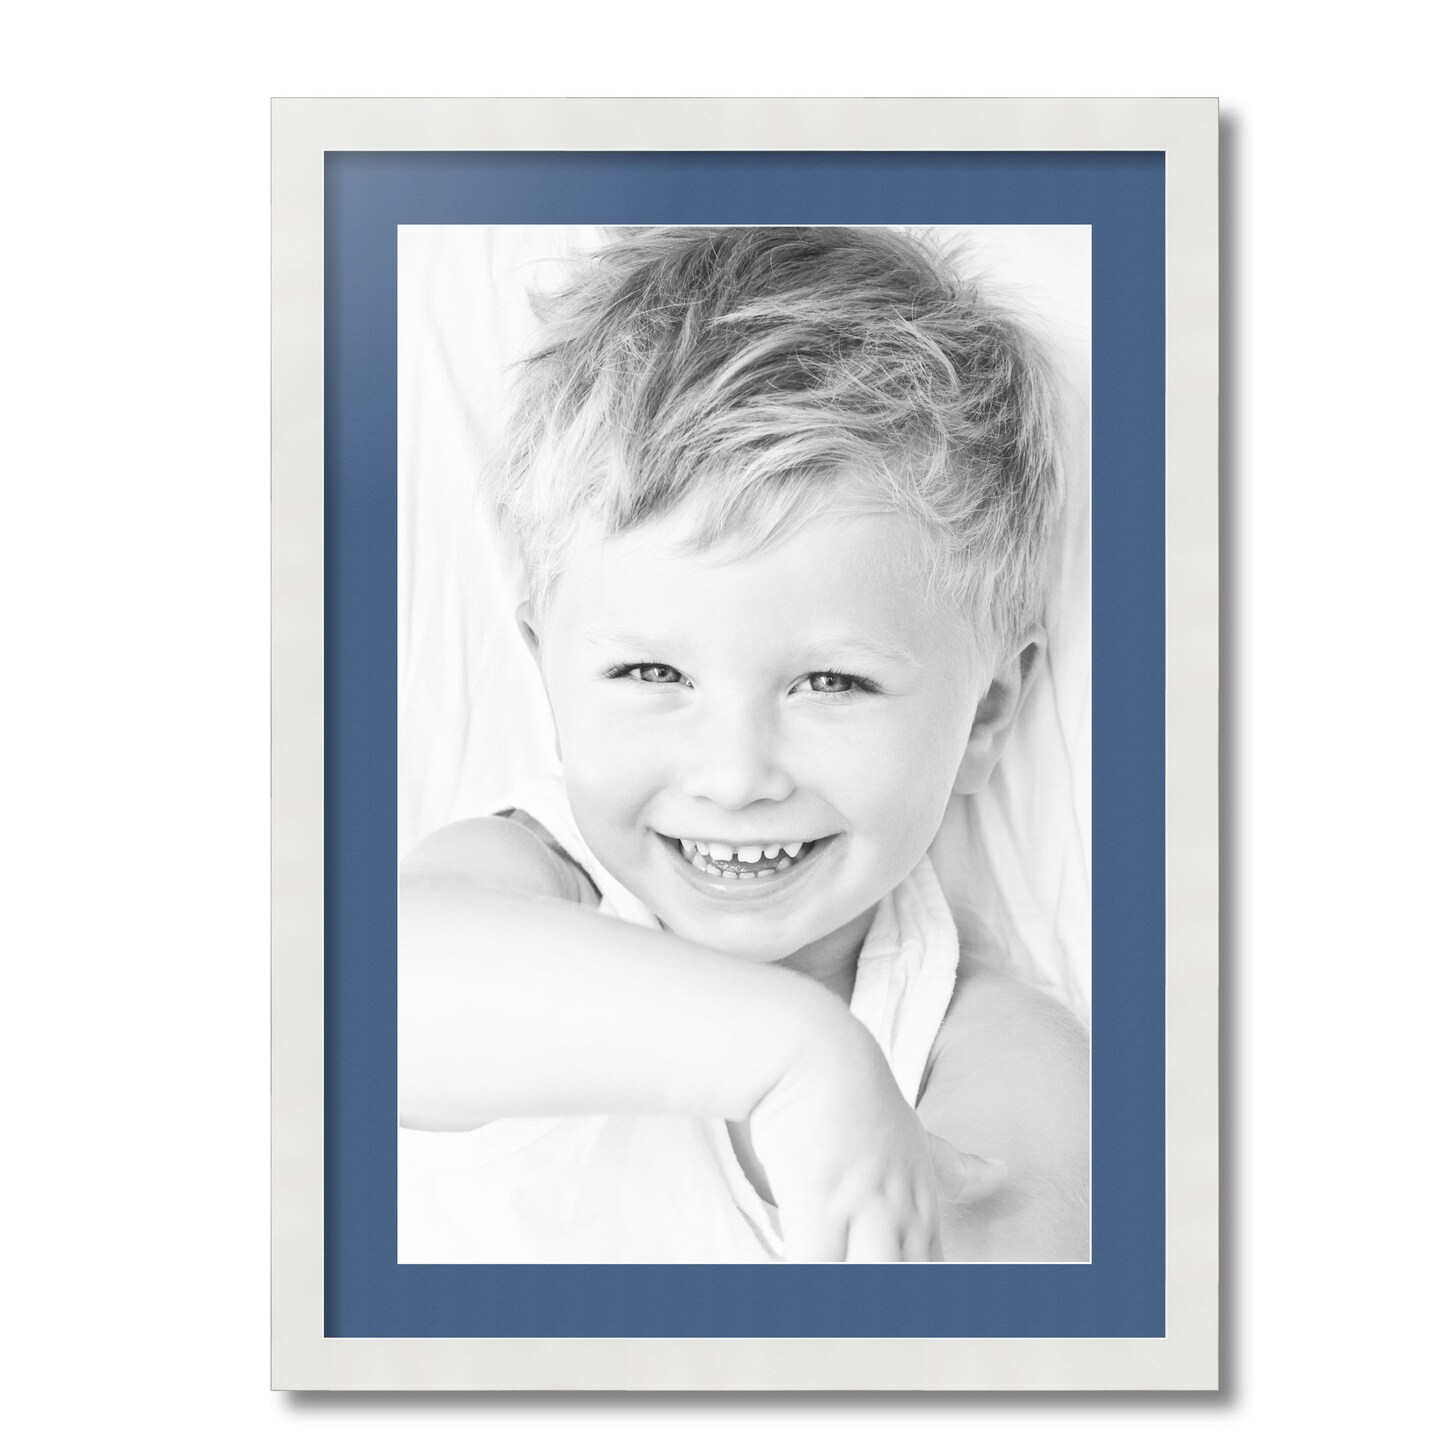 ArtToFrames 20x30 White Custom Mat for Picture Frame with Opening for  16x26 Photos. Mat Only, Frame Not Included (MAT-241)